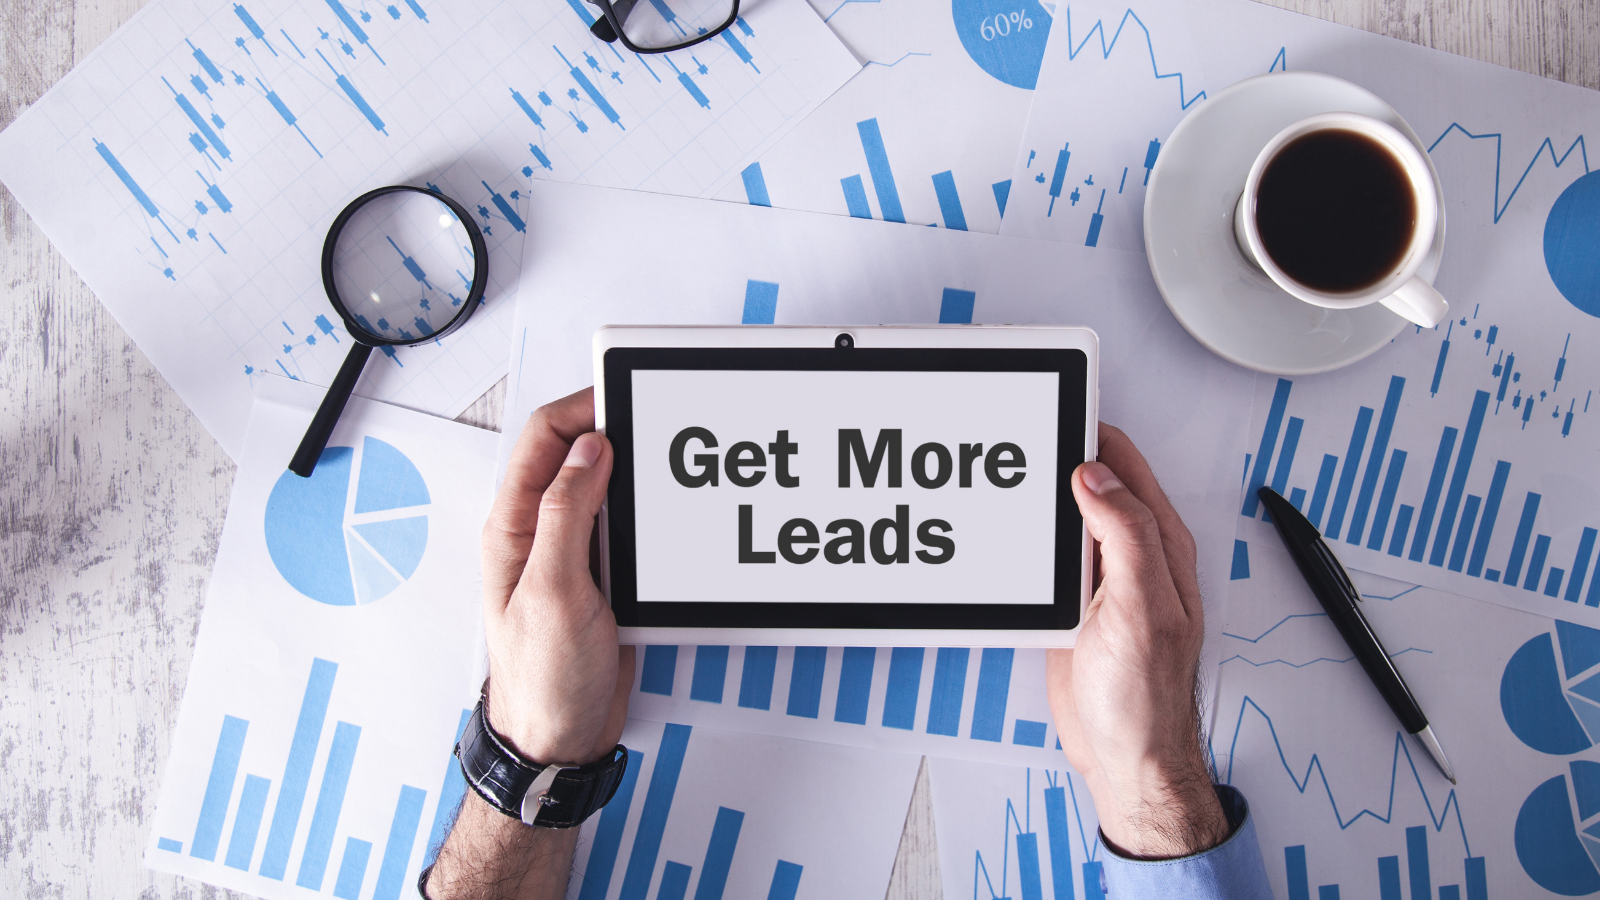 Are You Following the Best Practices for Lead Generation?